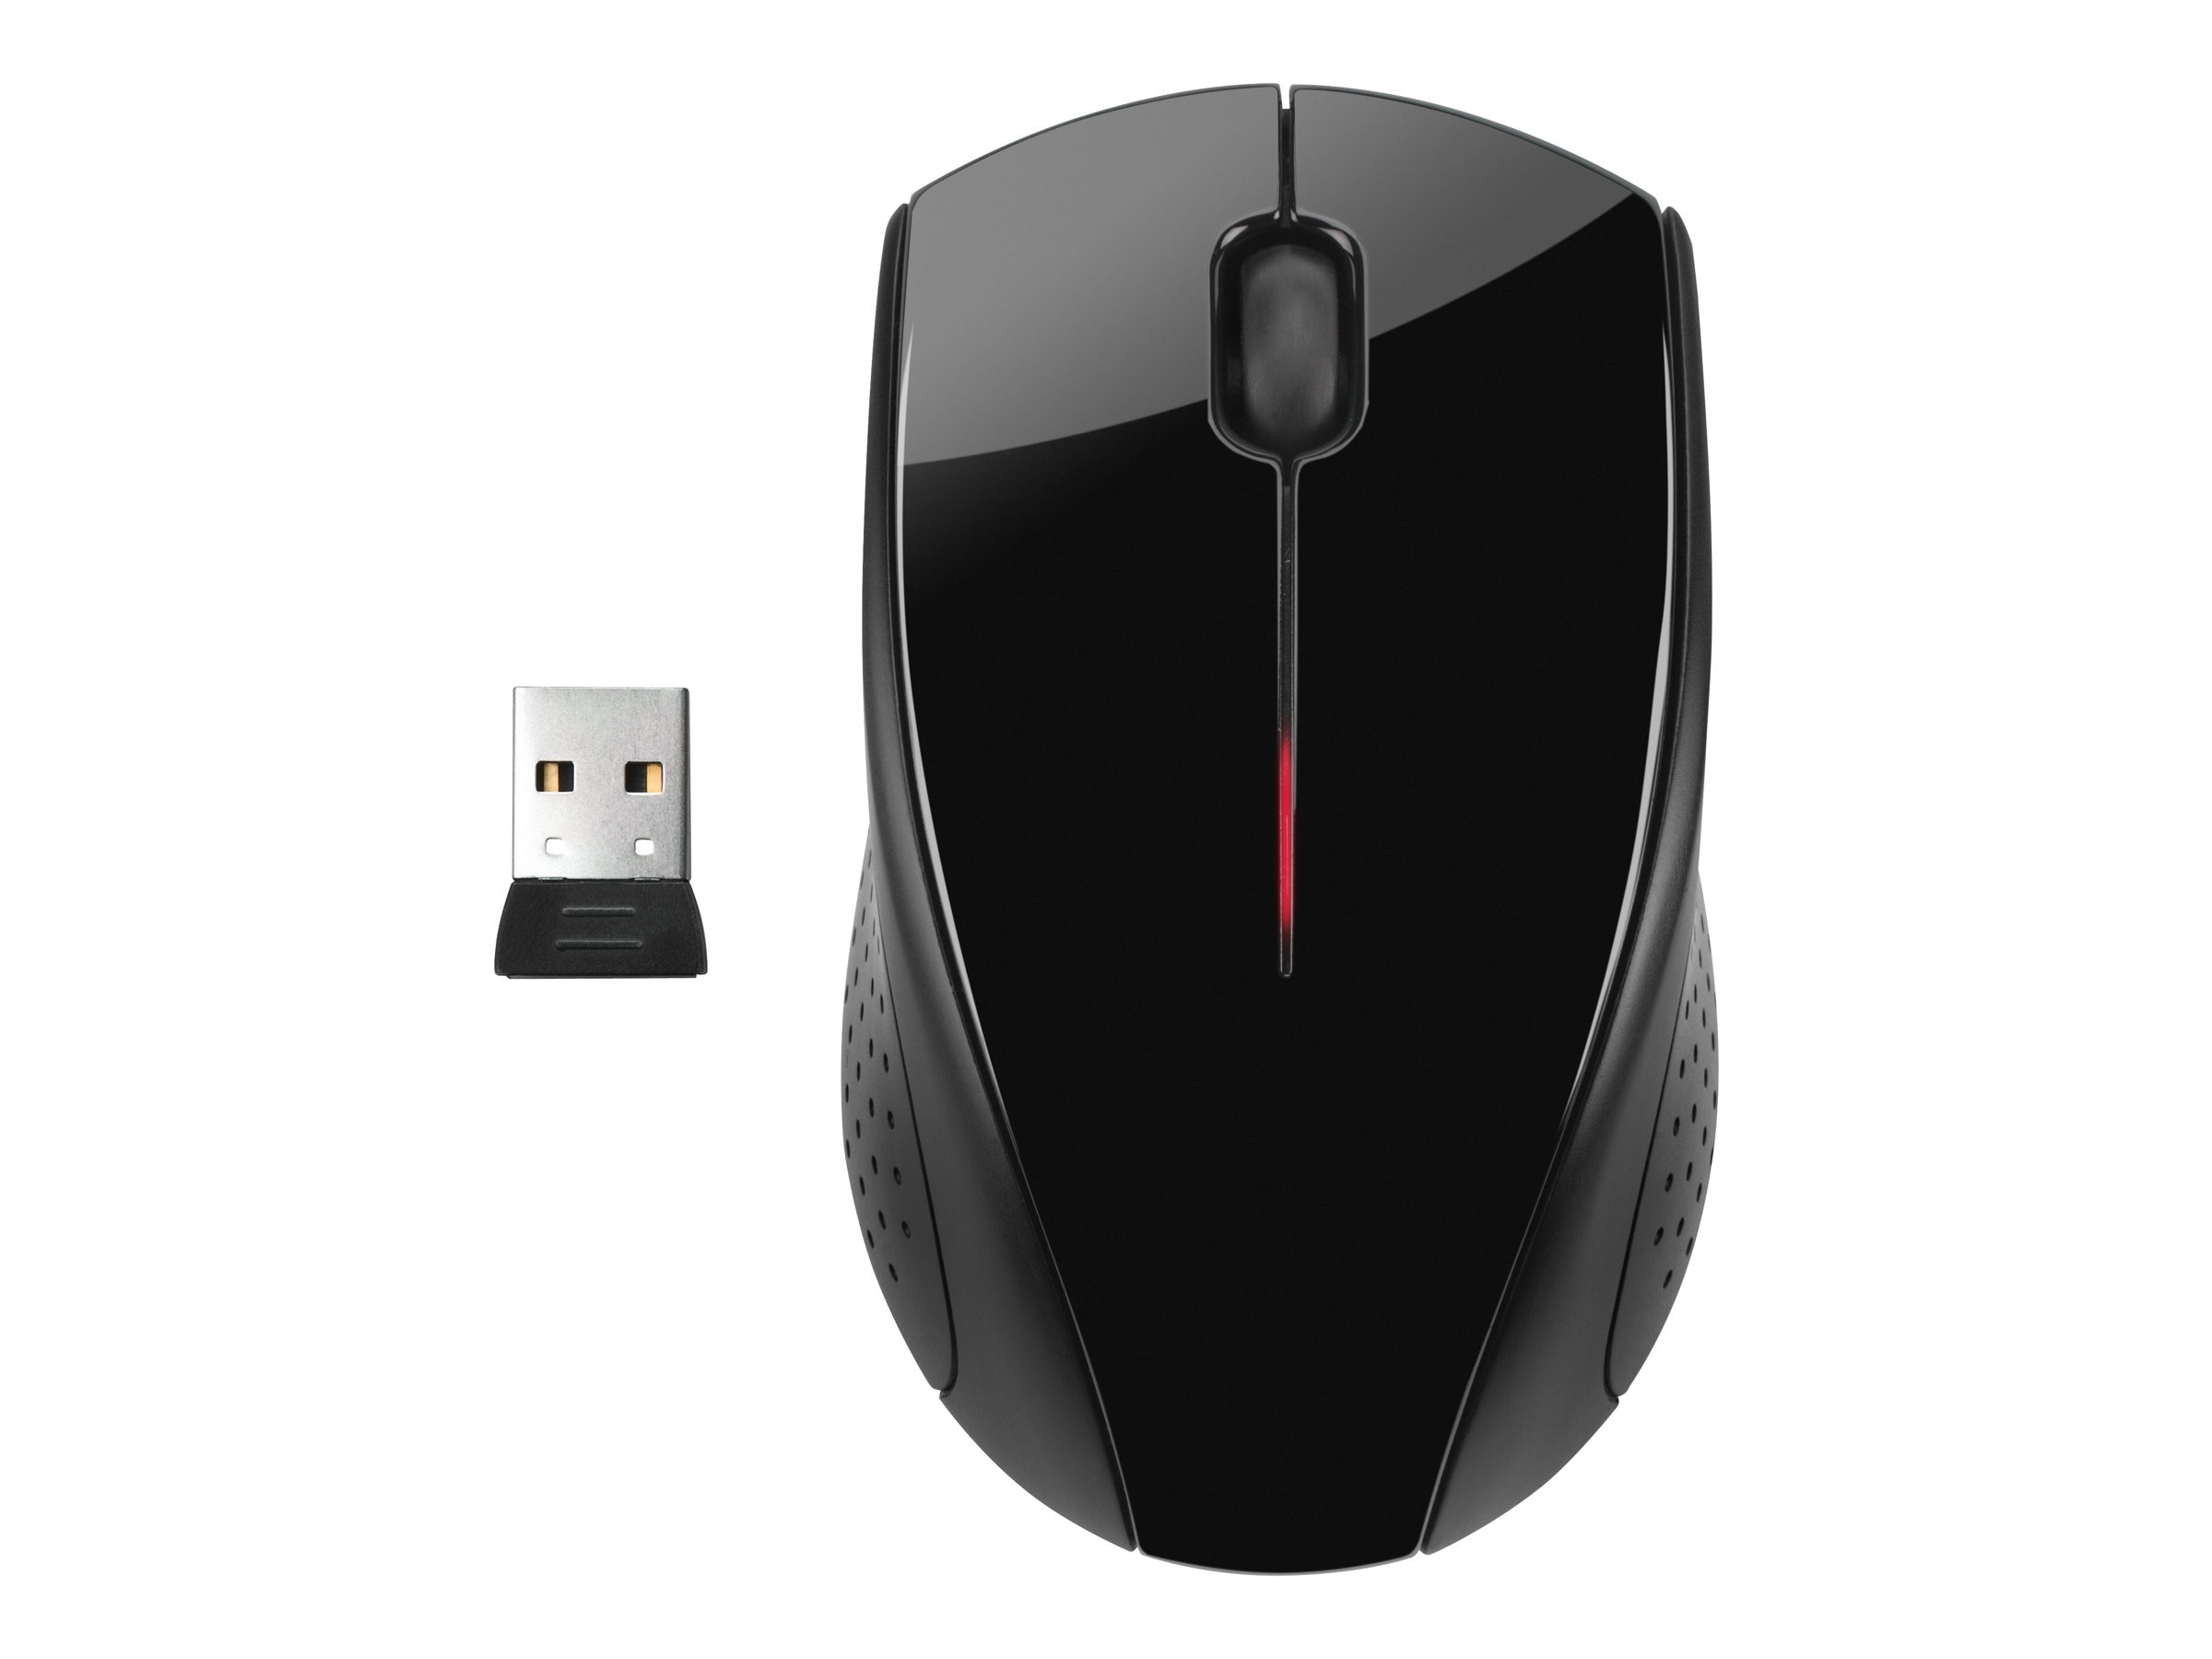 hp wireless mouse x3000 use without usb receiver